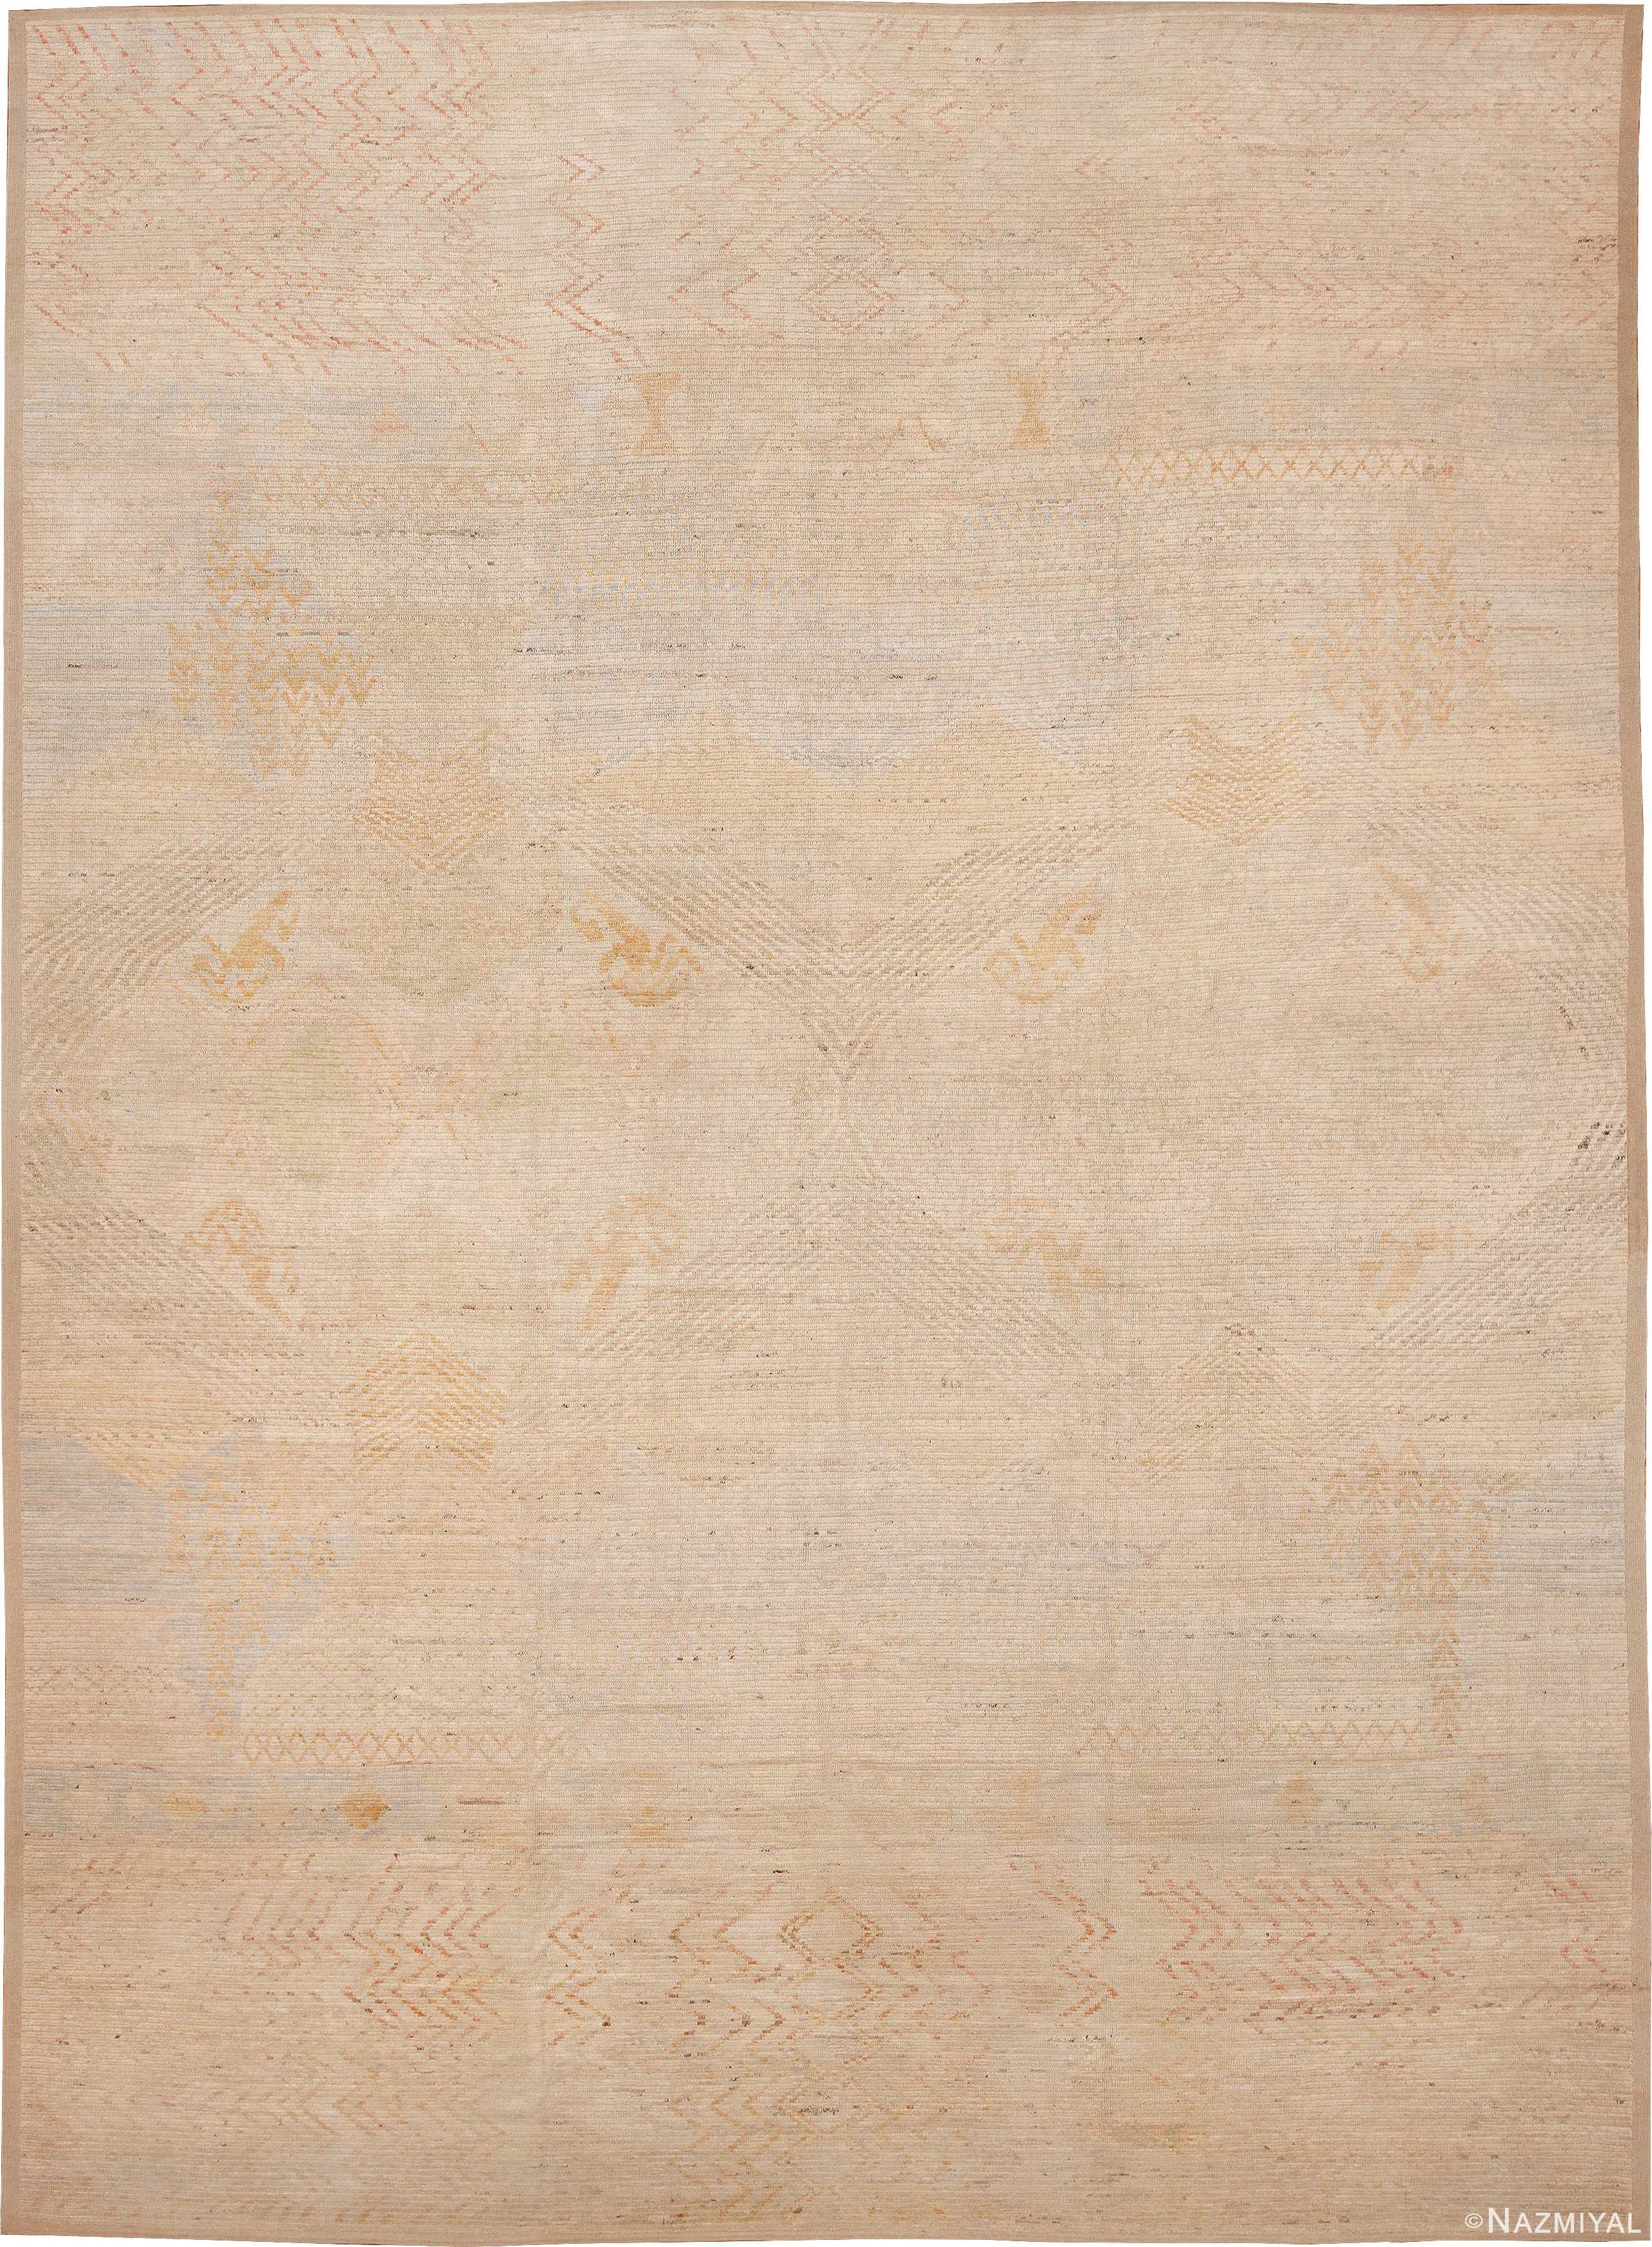 Oversized Decorative Contemporary Distressed Area Rug 60944 by Nazmiyal Antique Rugs